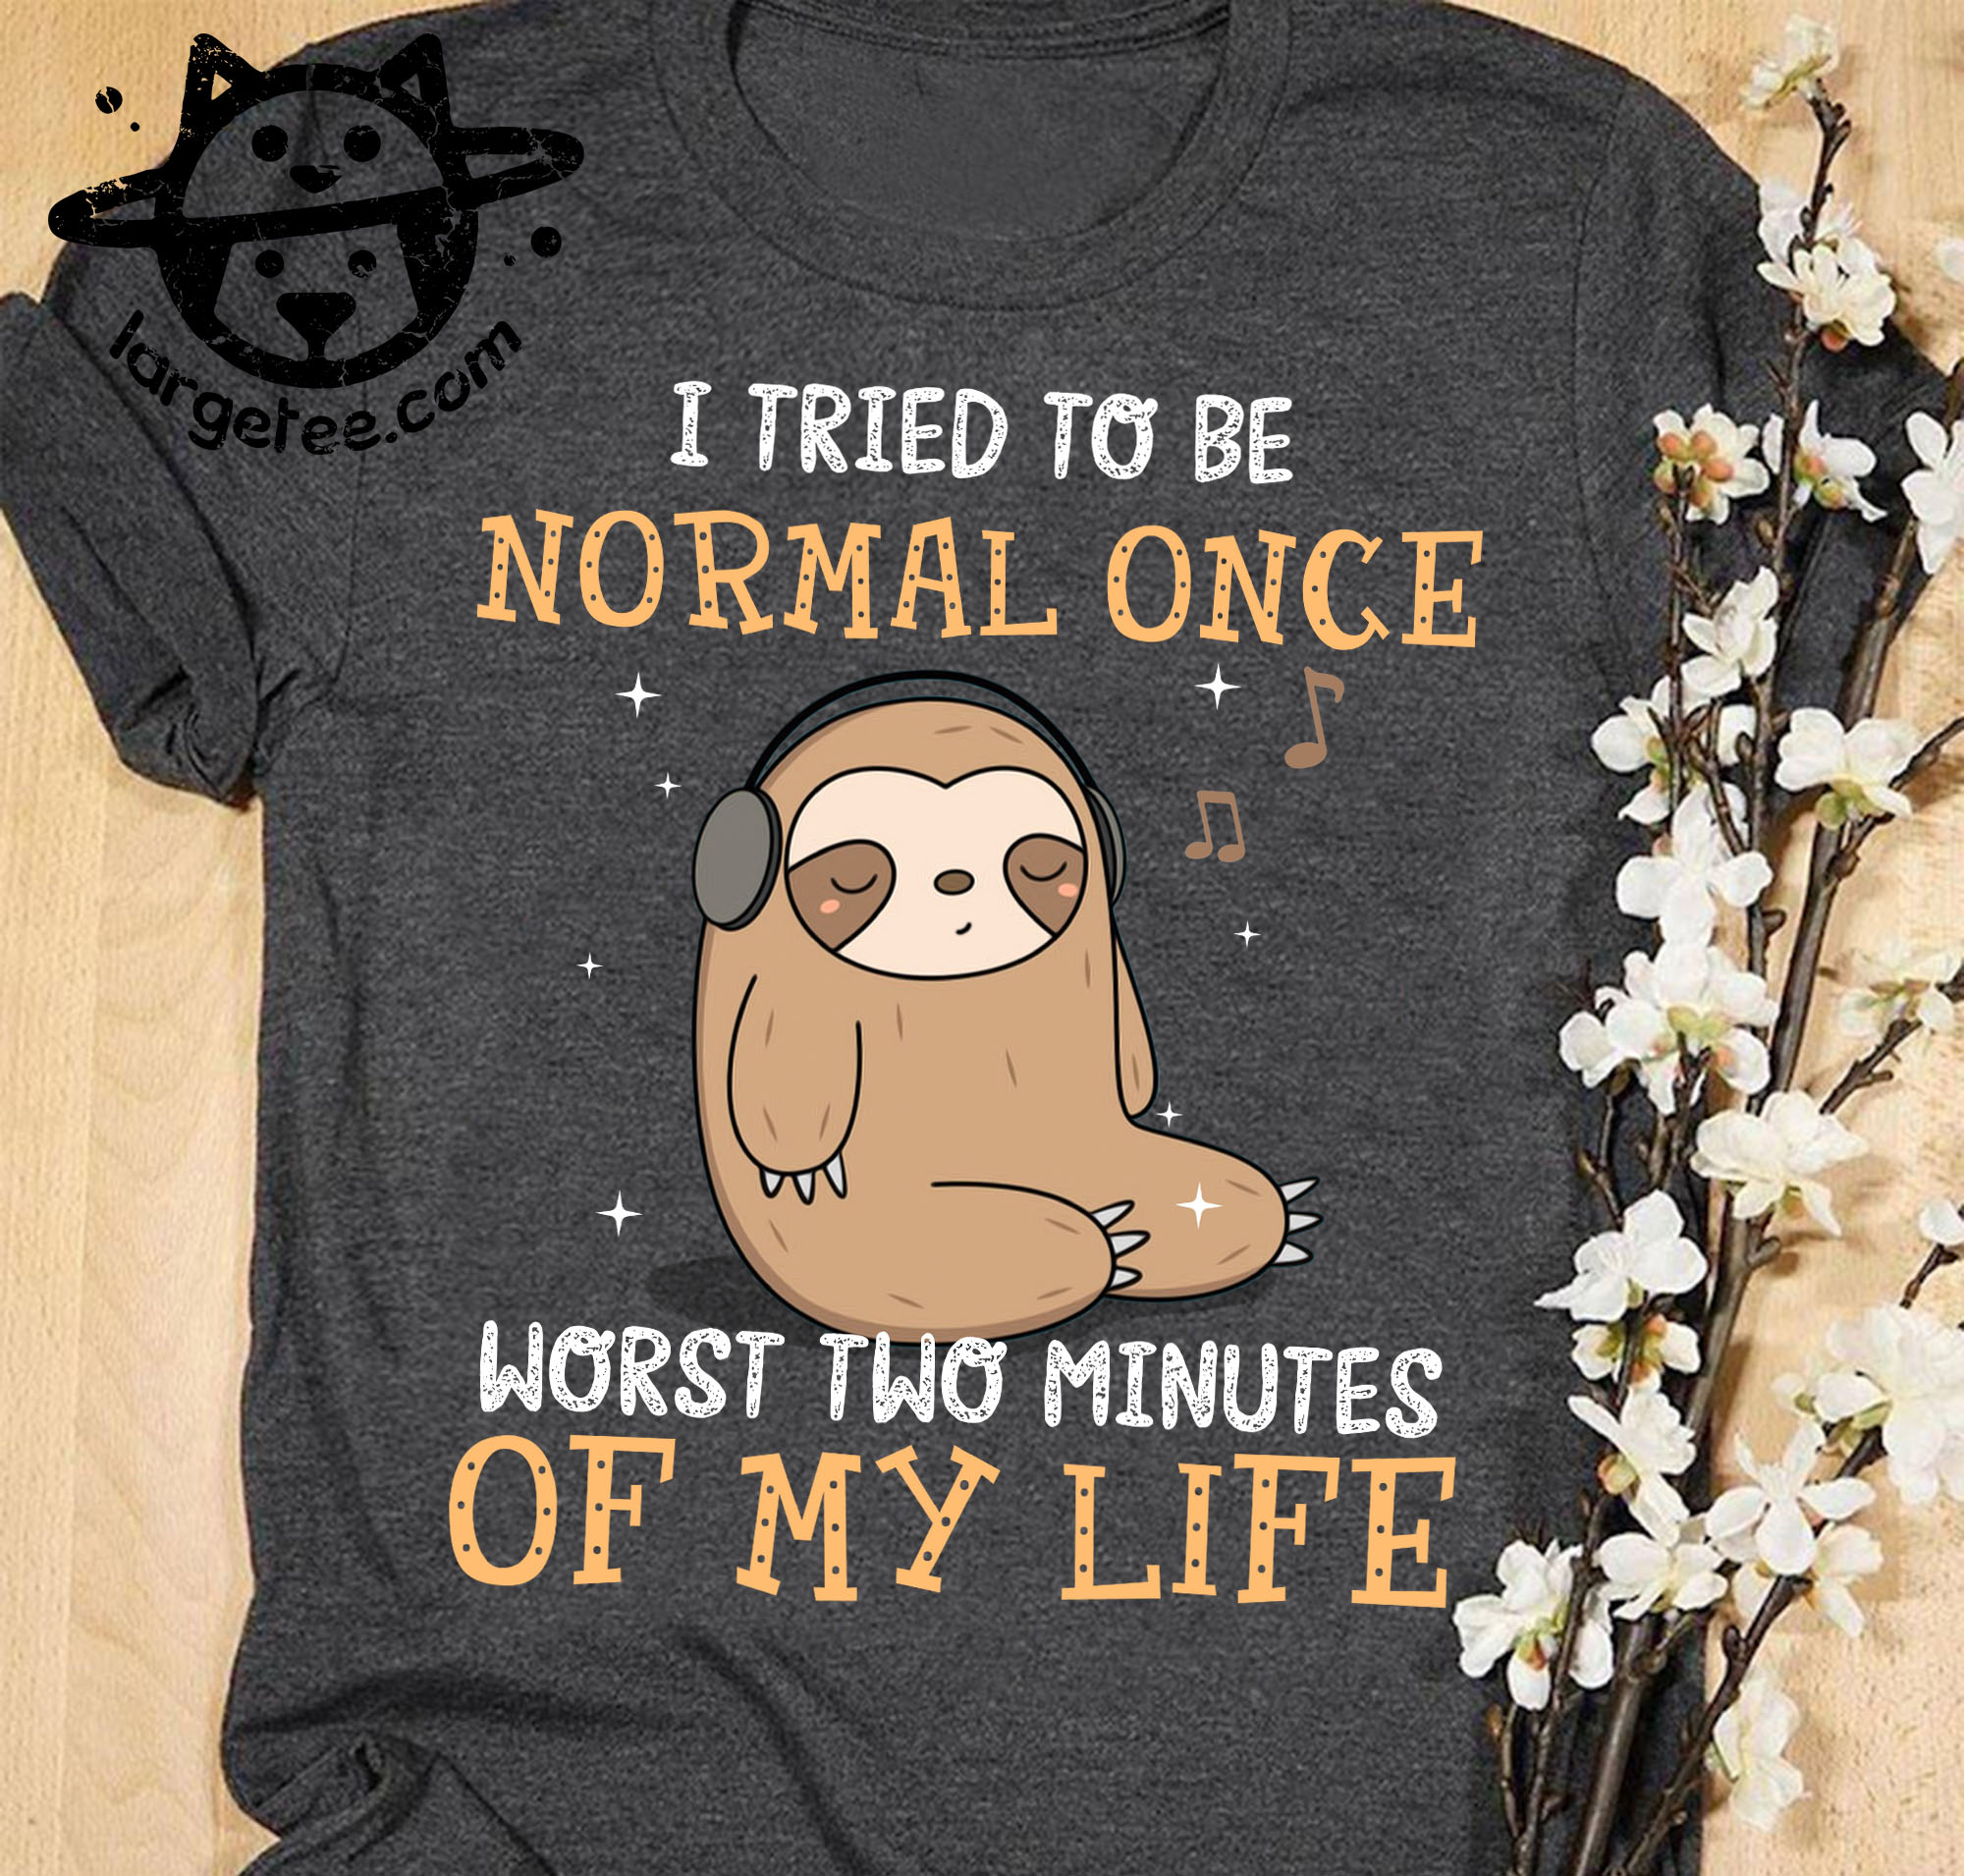 I tried to be normal once worst two minutes of my life - Sloth